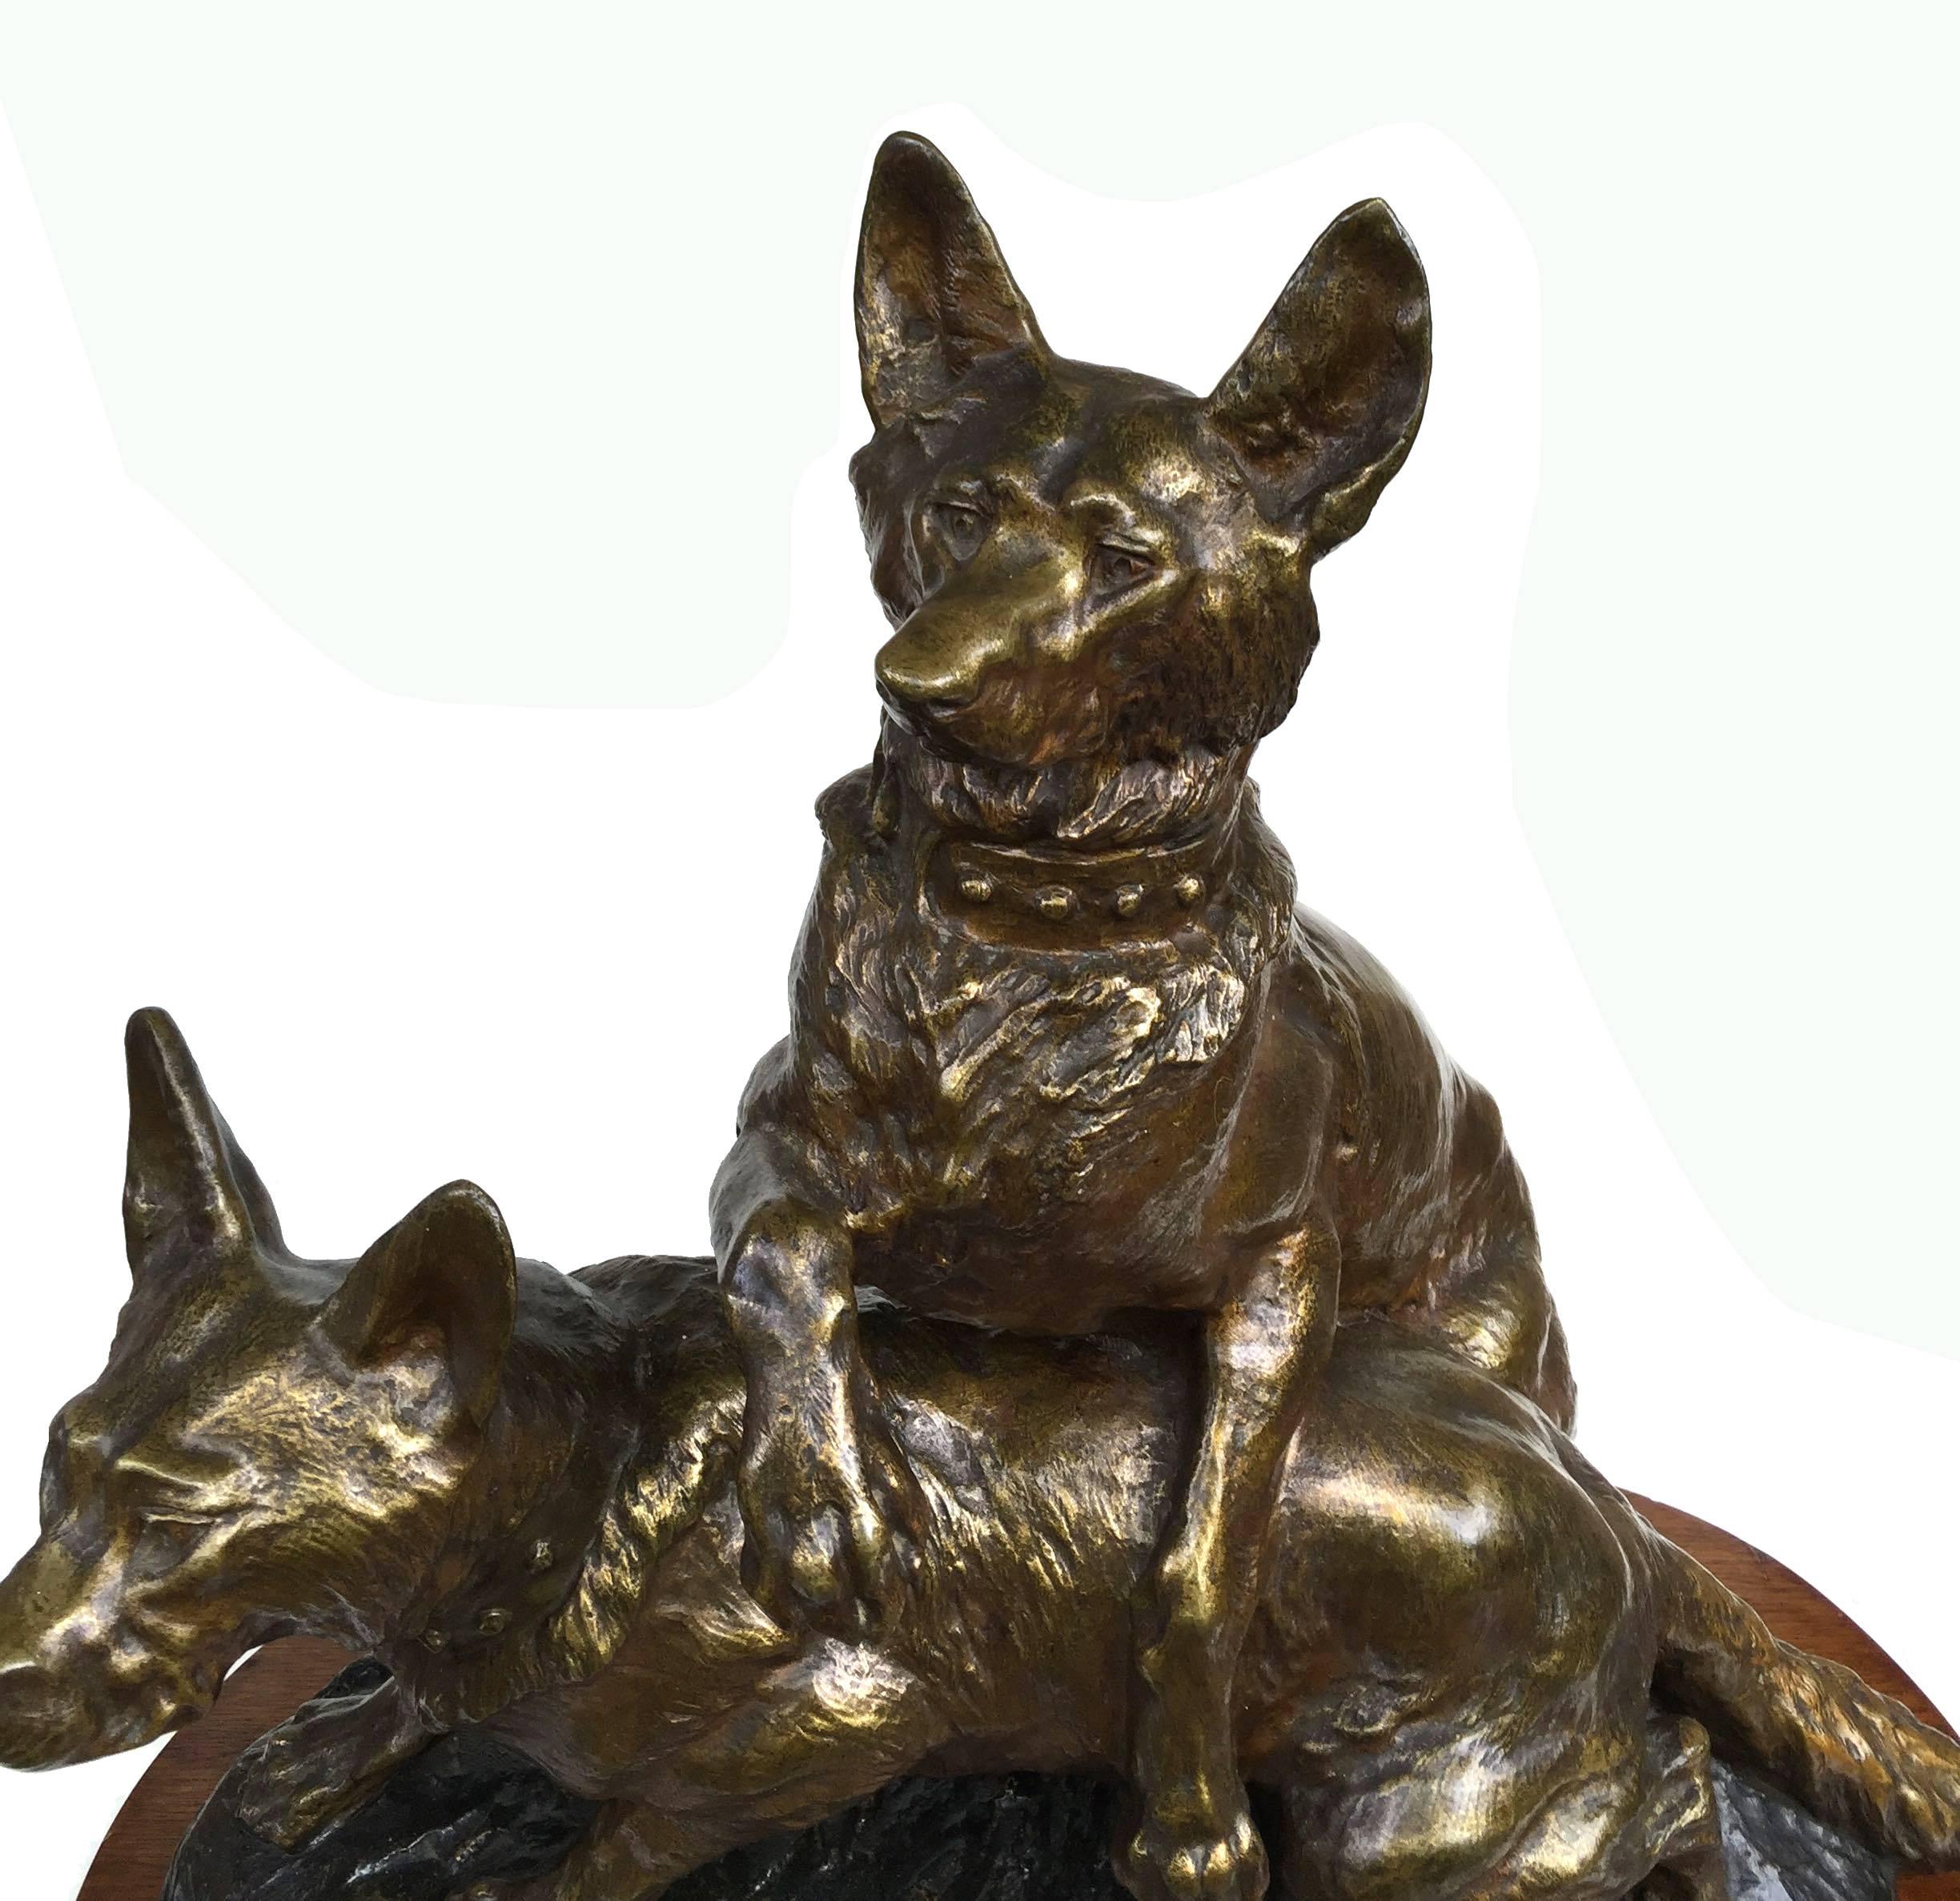 French Thomas Francois Cartier (1879-1943) bronze sculpture of two Alsatian wolf dogs, the female facing sinister, the male facing forward with one paw over her back, both at attention, listening. Signed Cartier, center front of the mounded